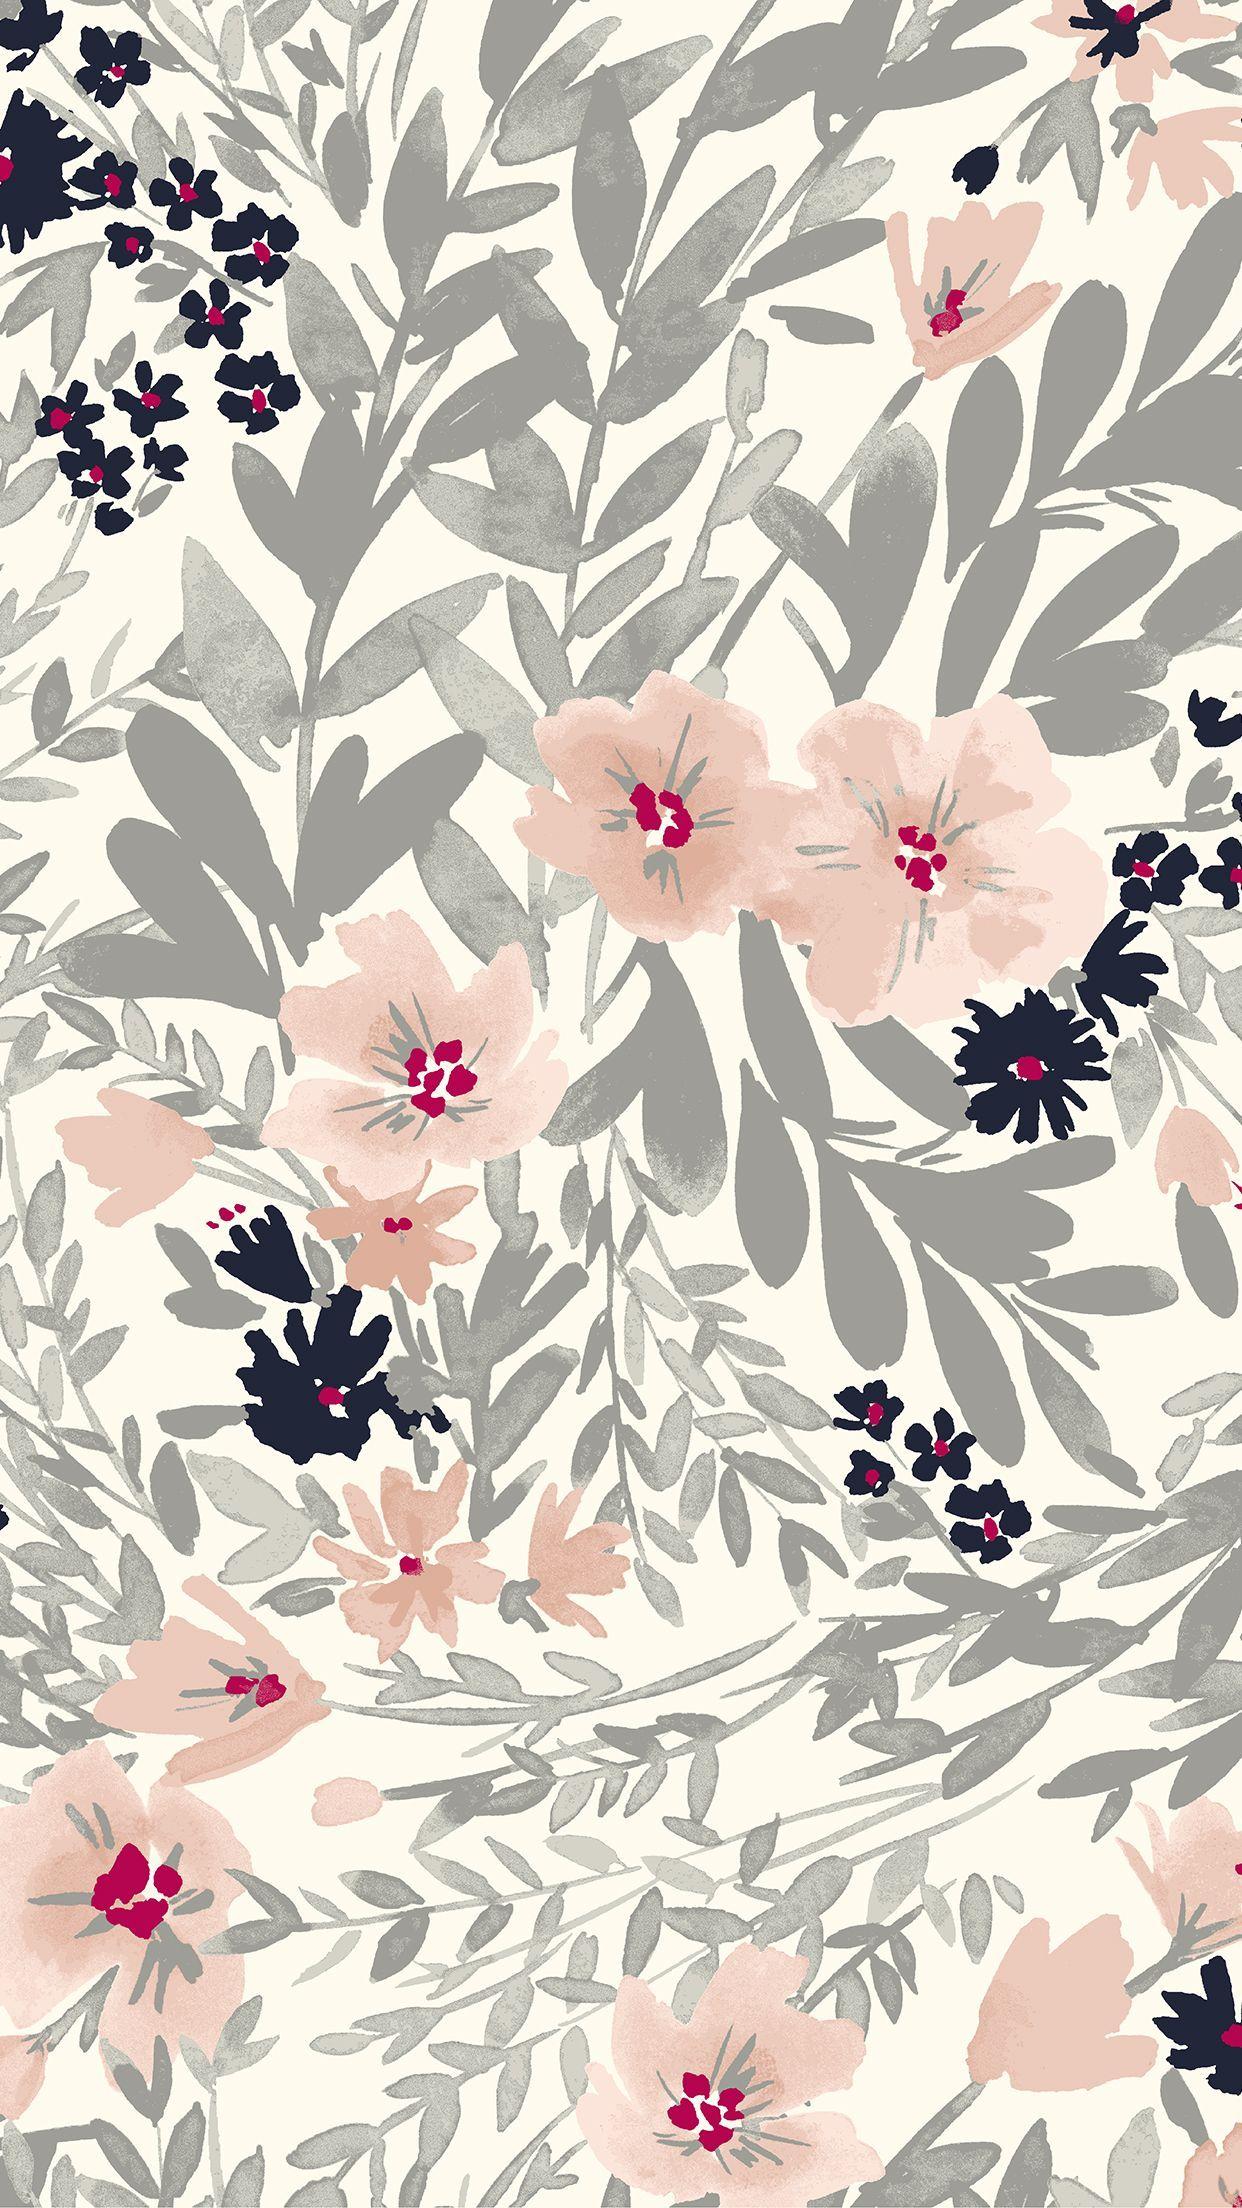 White Illustration Flowers Phone Wallpaper Template and Ideas for Design   Fotor